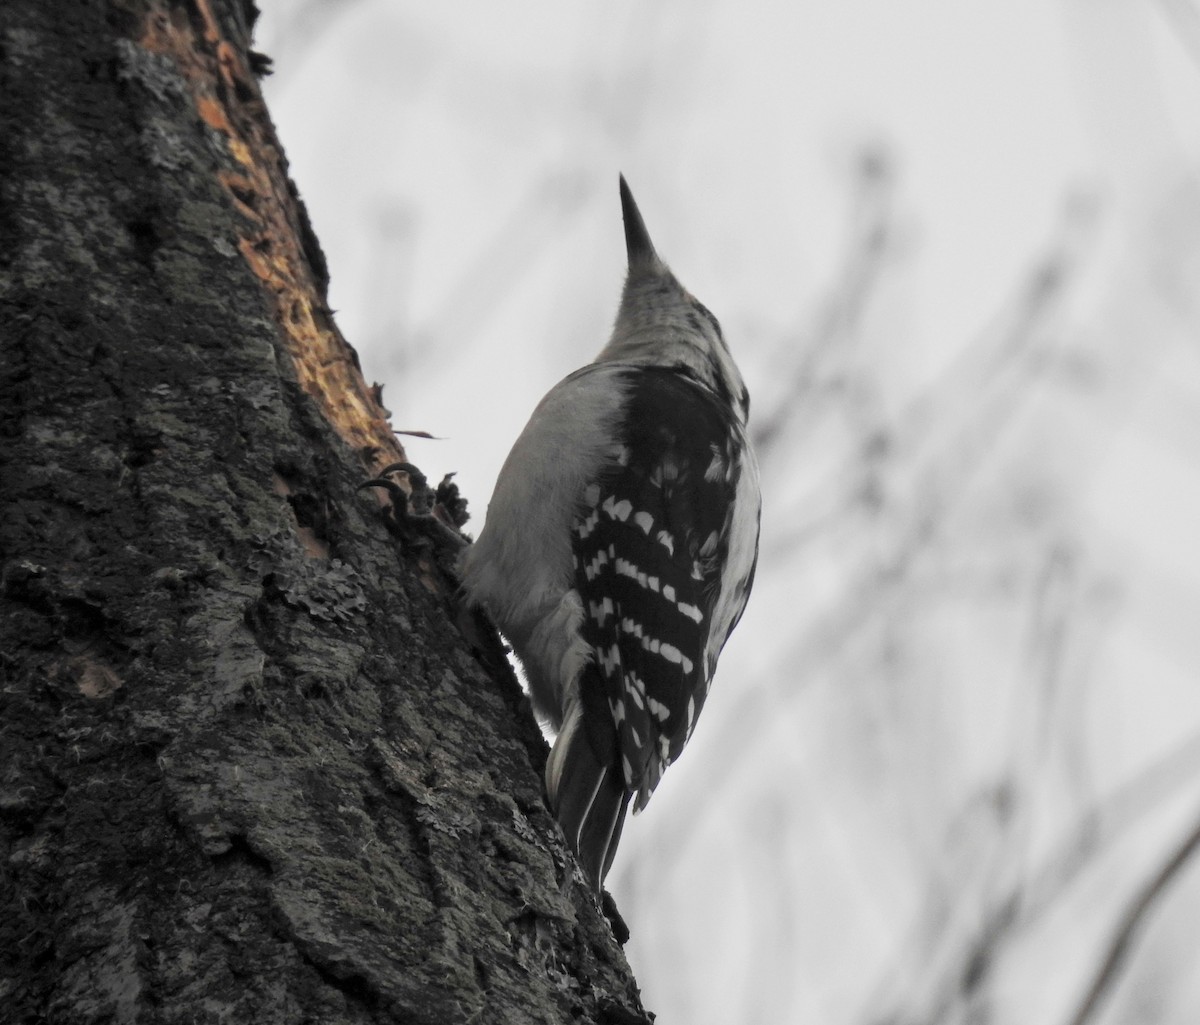 Hairy Woodpecker - Lydia Curtis